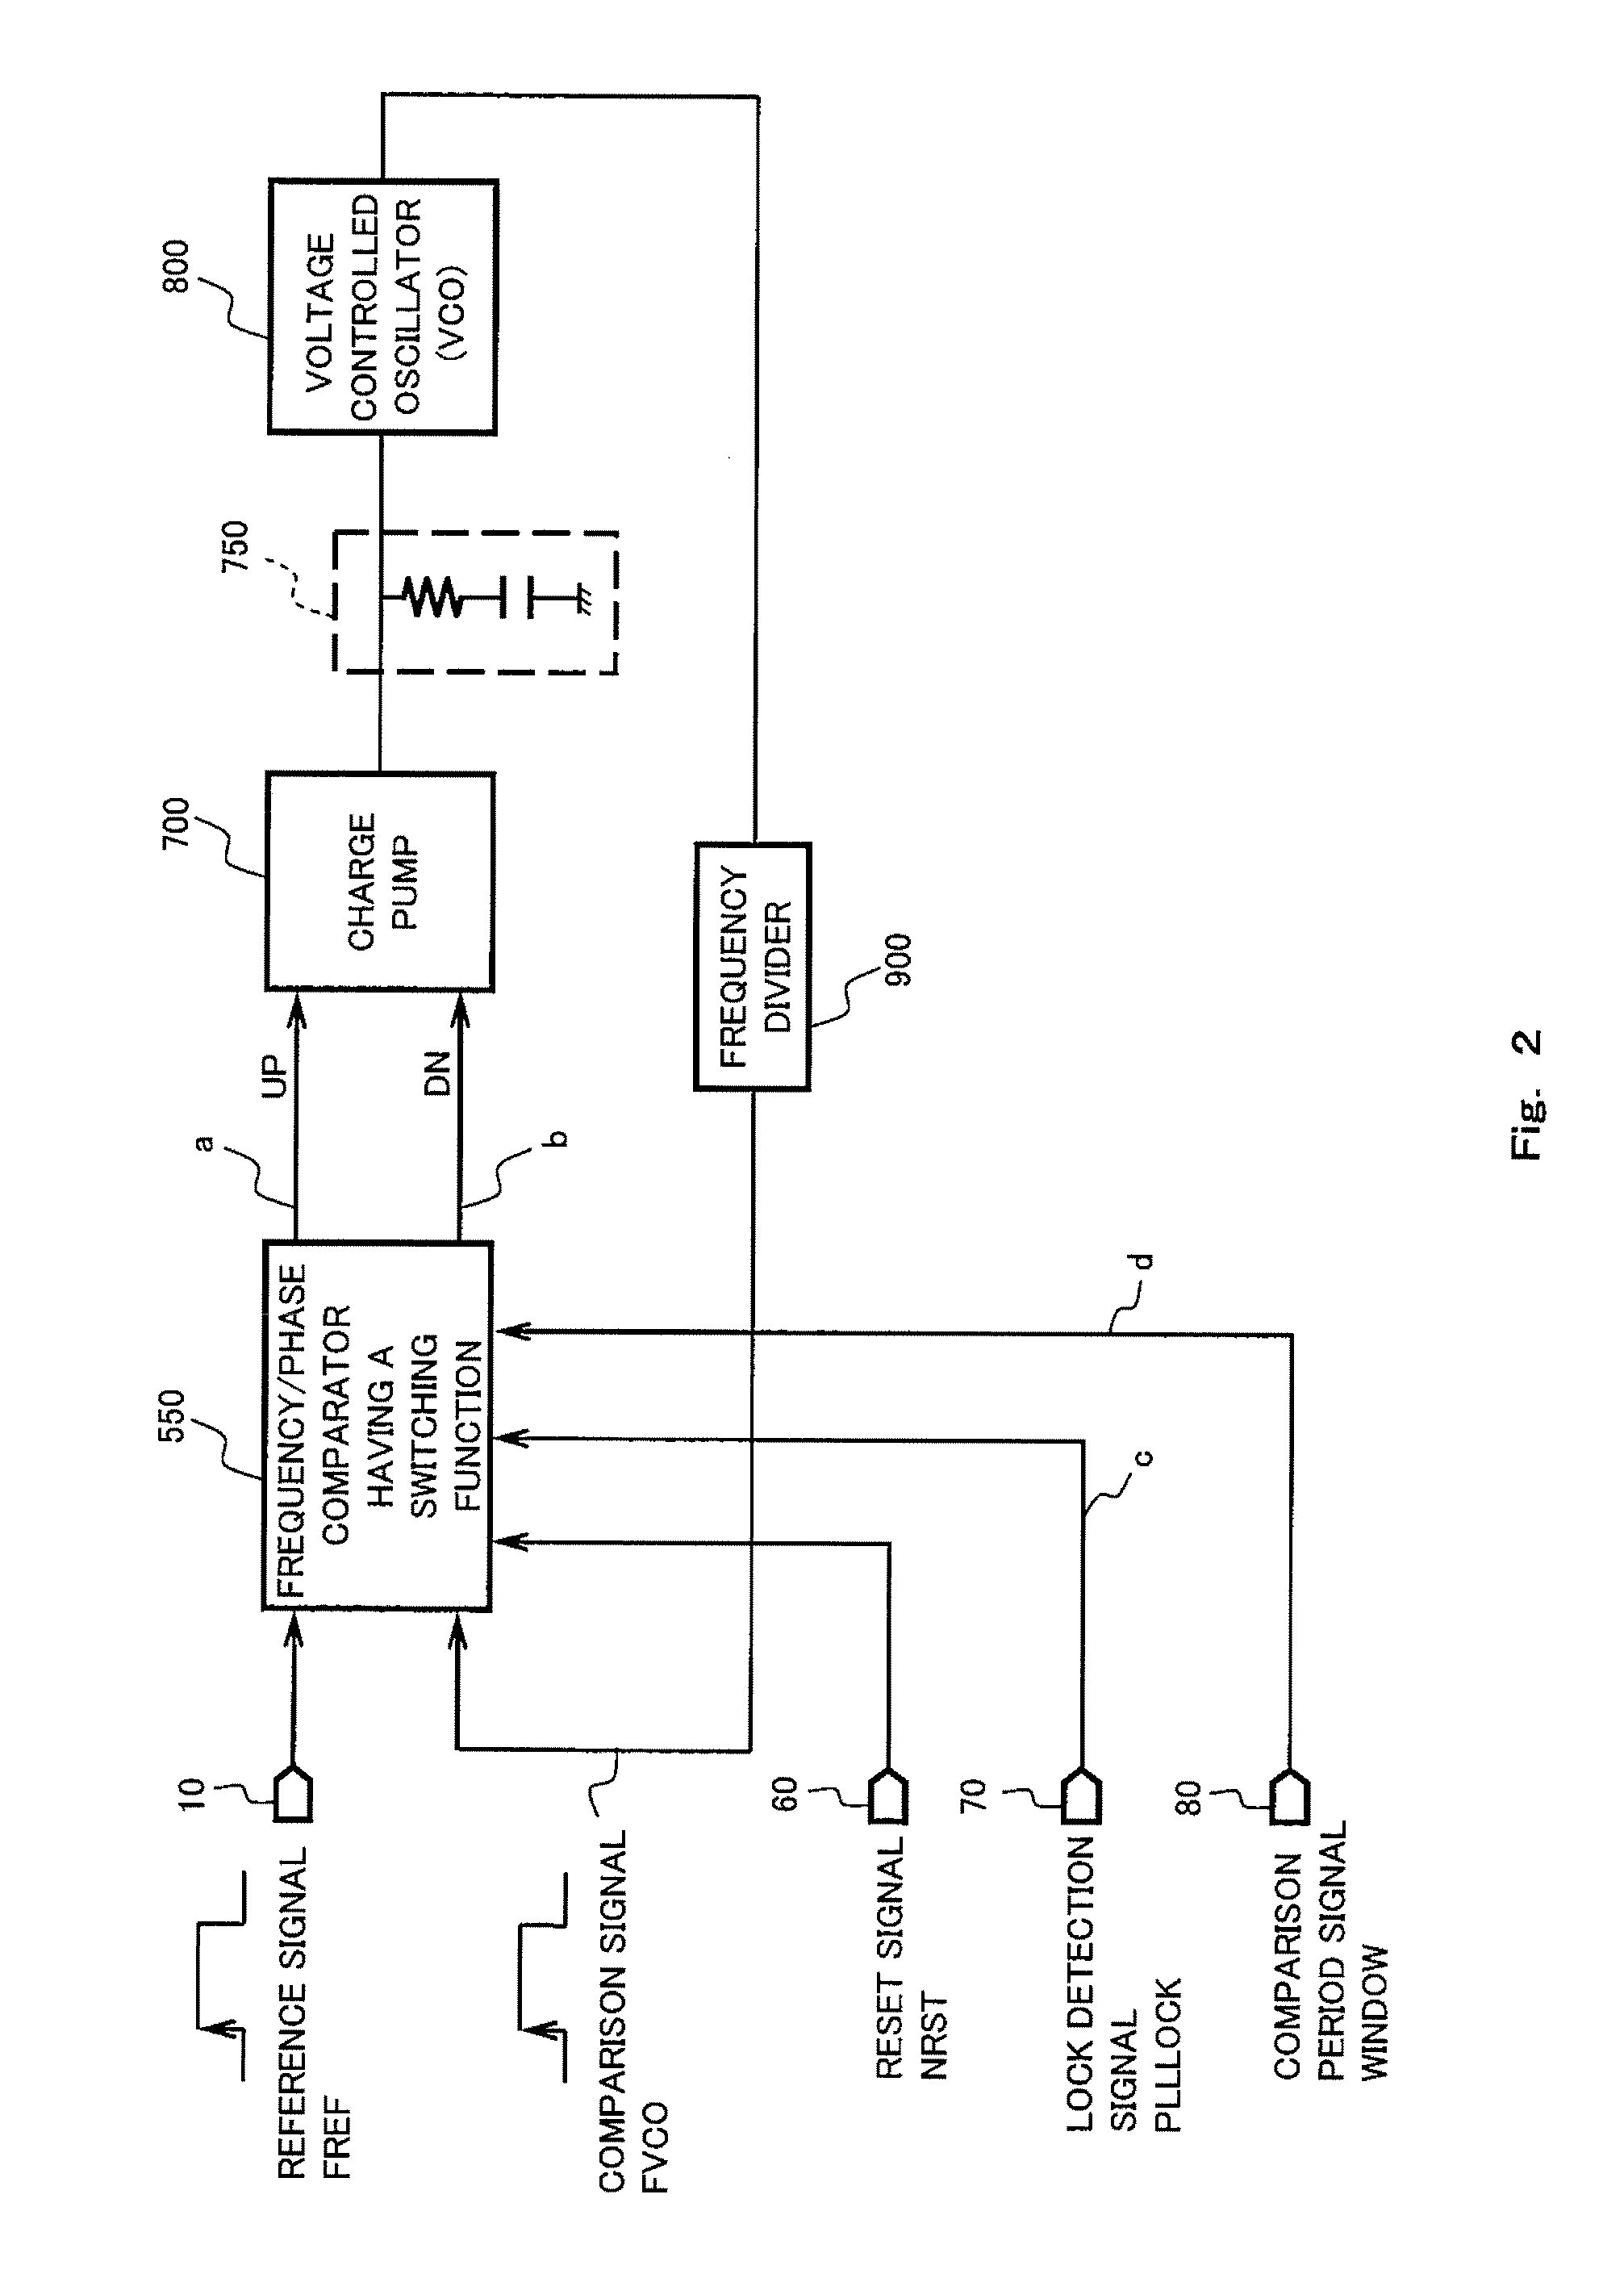 Pll circuit for reducing reference leak and phase noise